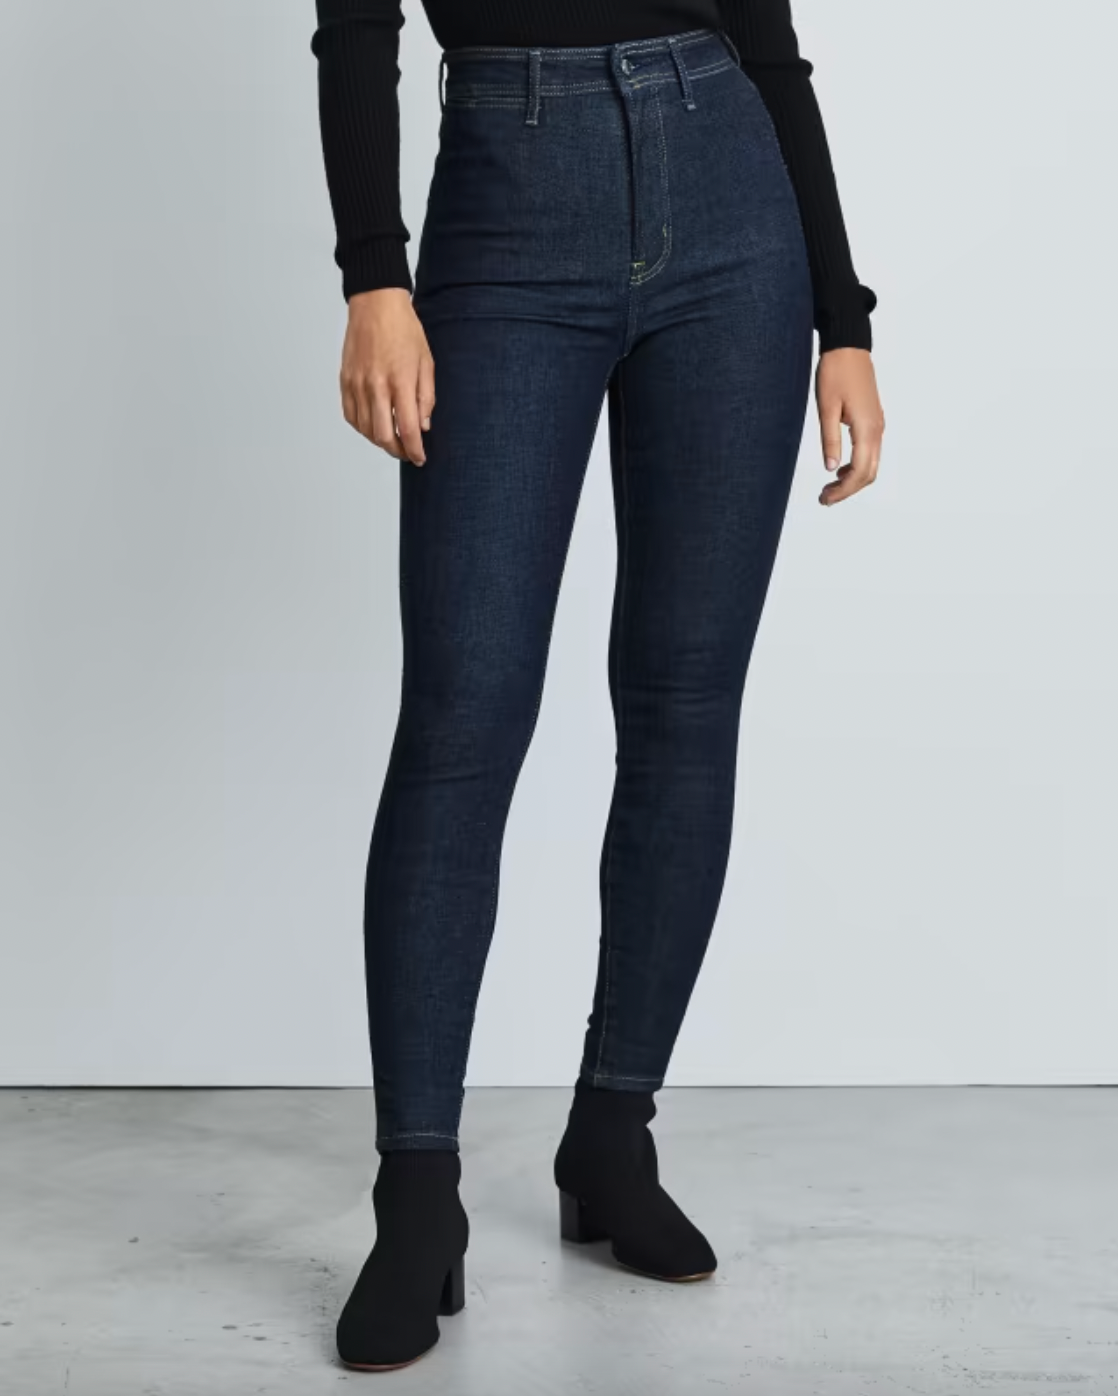 Everlane + The Way-High® Clean Front Skinny Jean